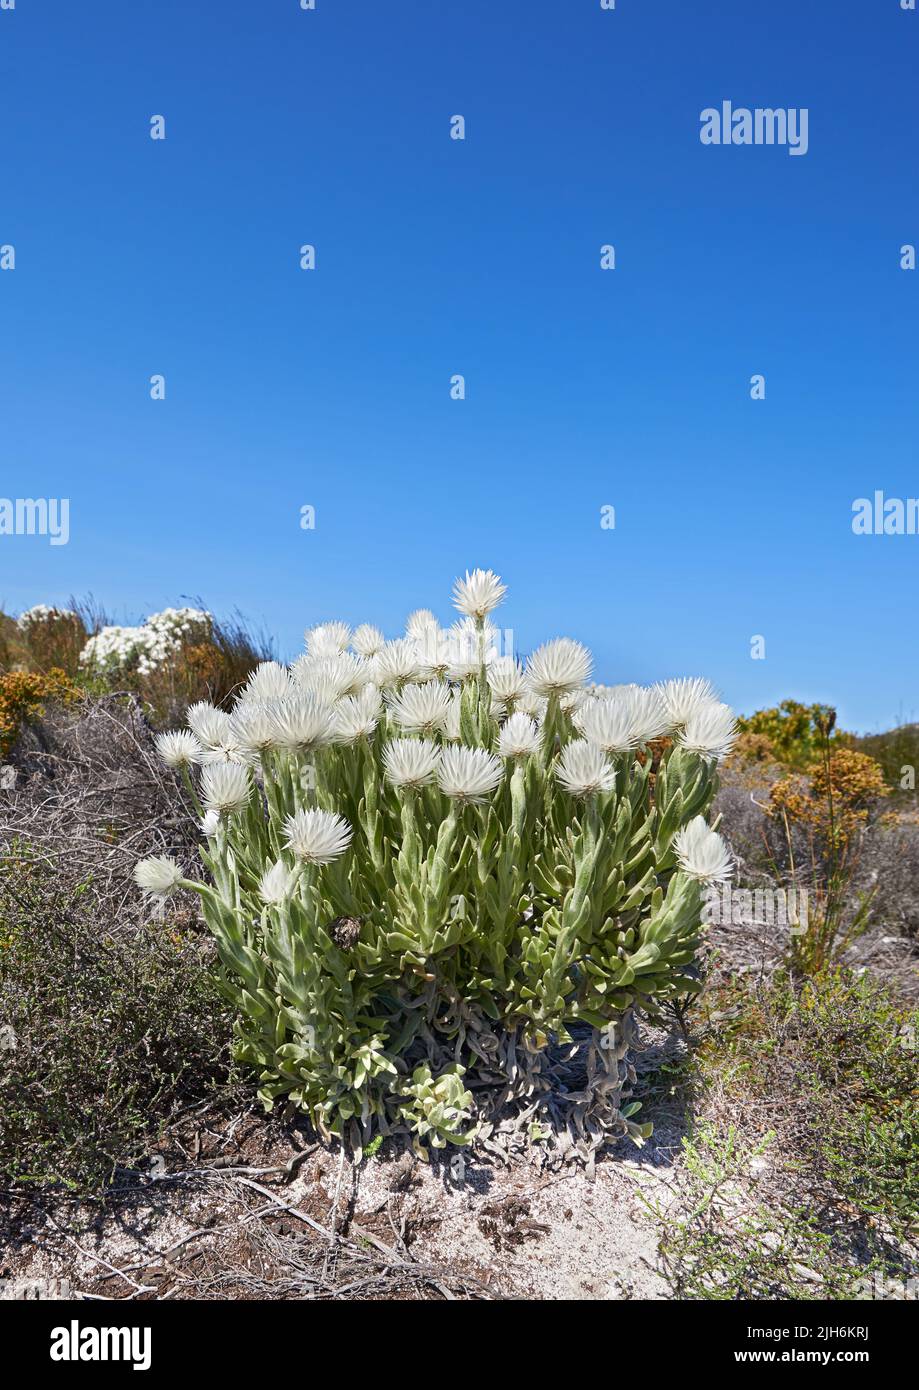 Copy space with white syncarpha argyropsis flowers growing in serene and wild nature reserve in Cape Town, South Africa. Green fynbos bushes or shrubs Stock Photo